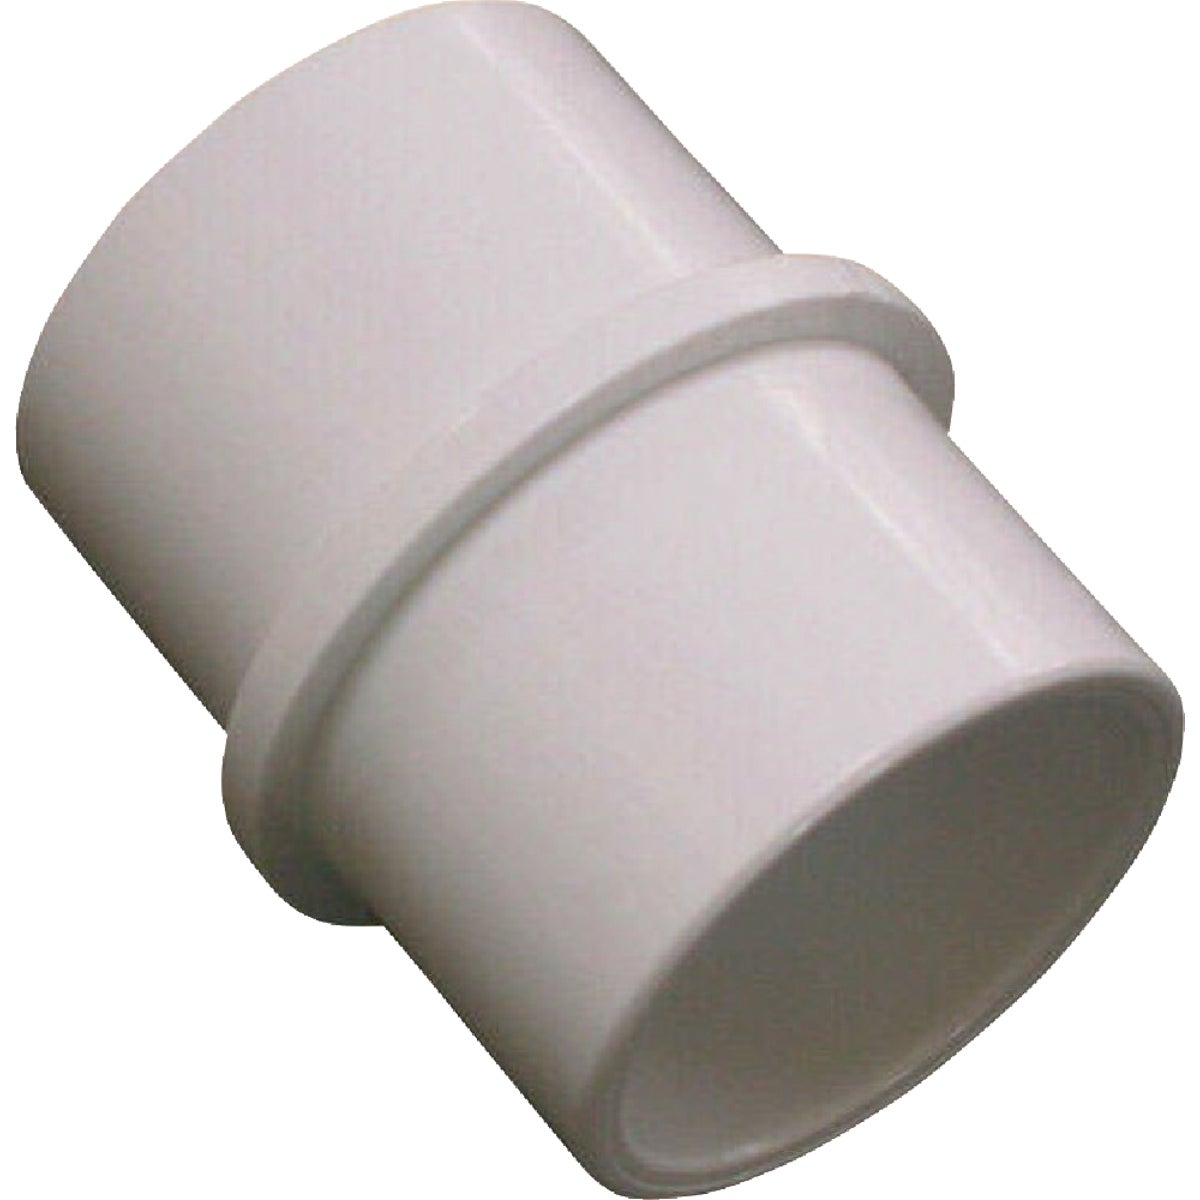 Campbell Magic Mend 3 In. Slip Schedule 40 Inside Flush Connection PVC Coupling